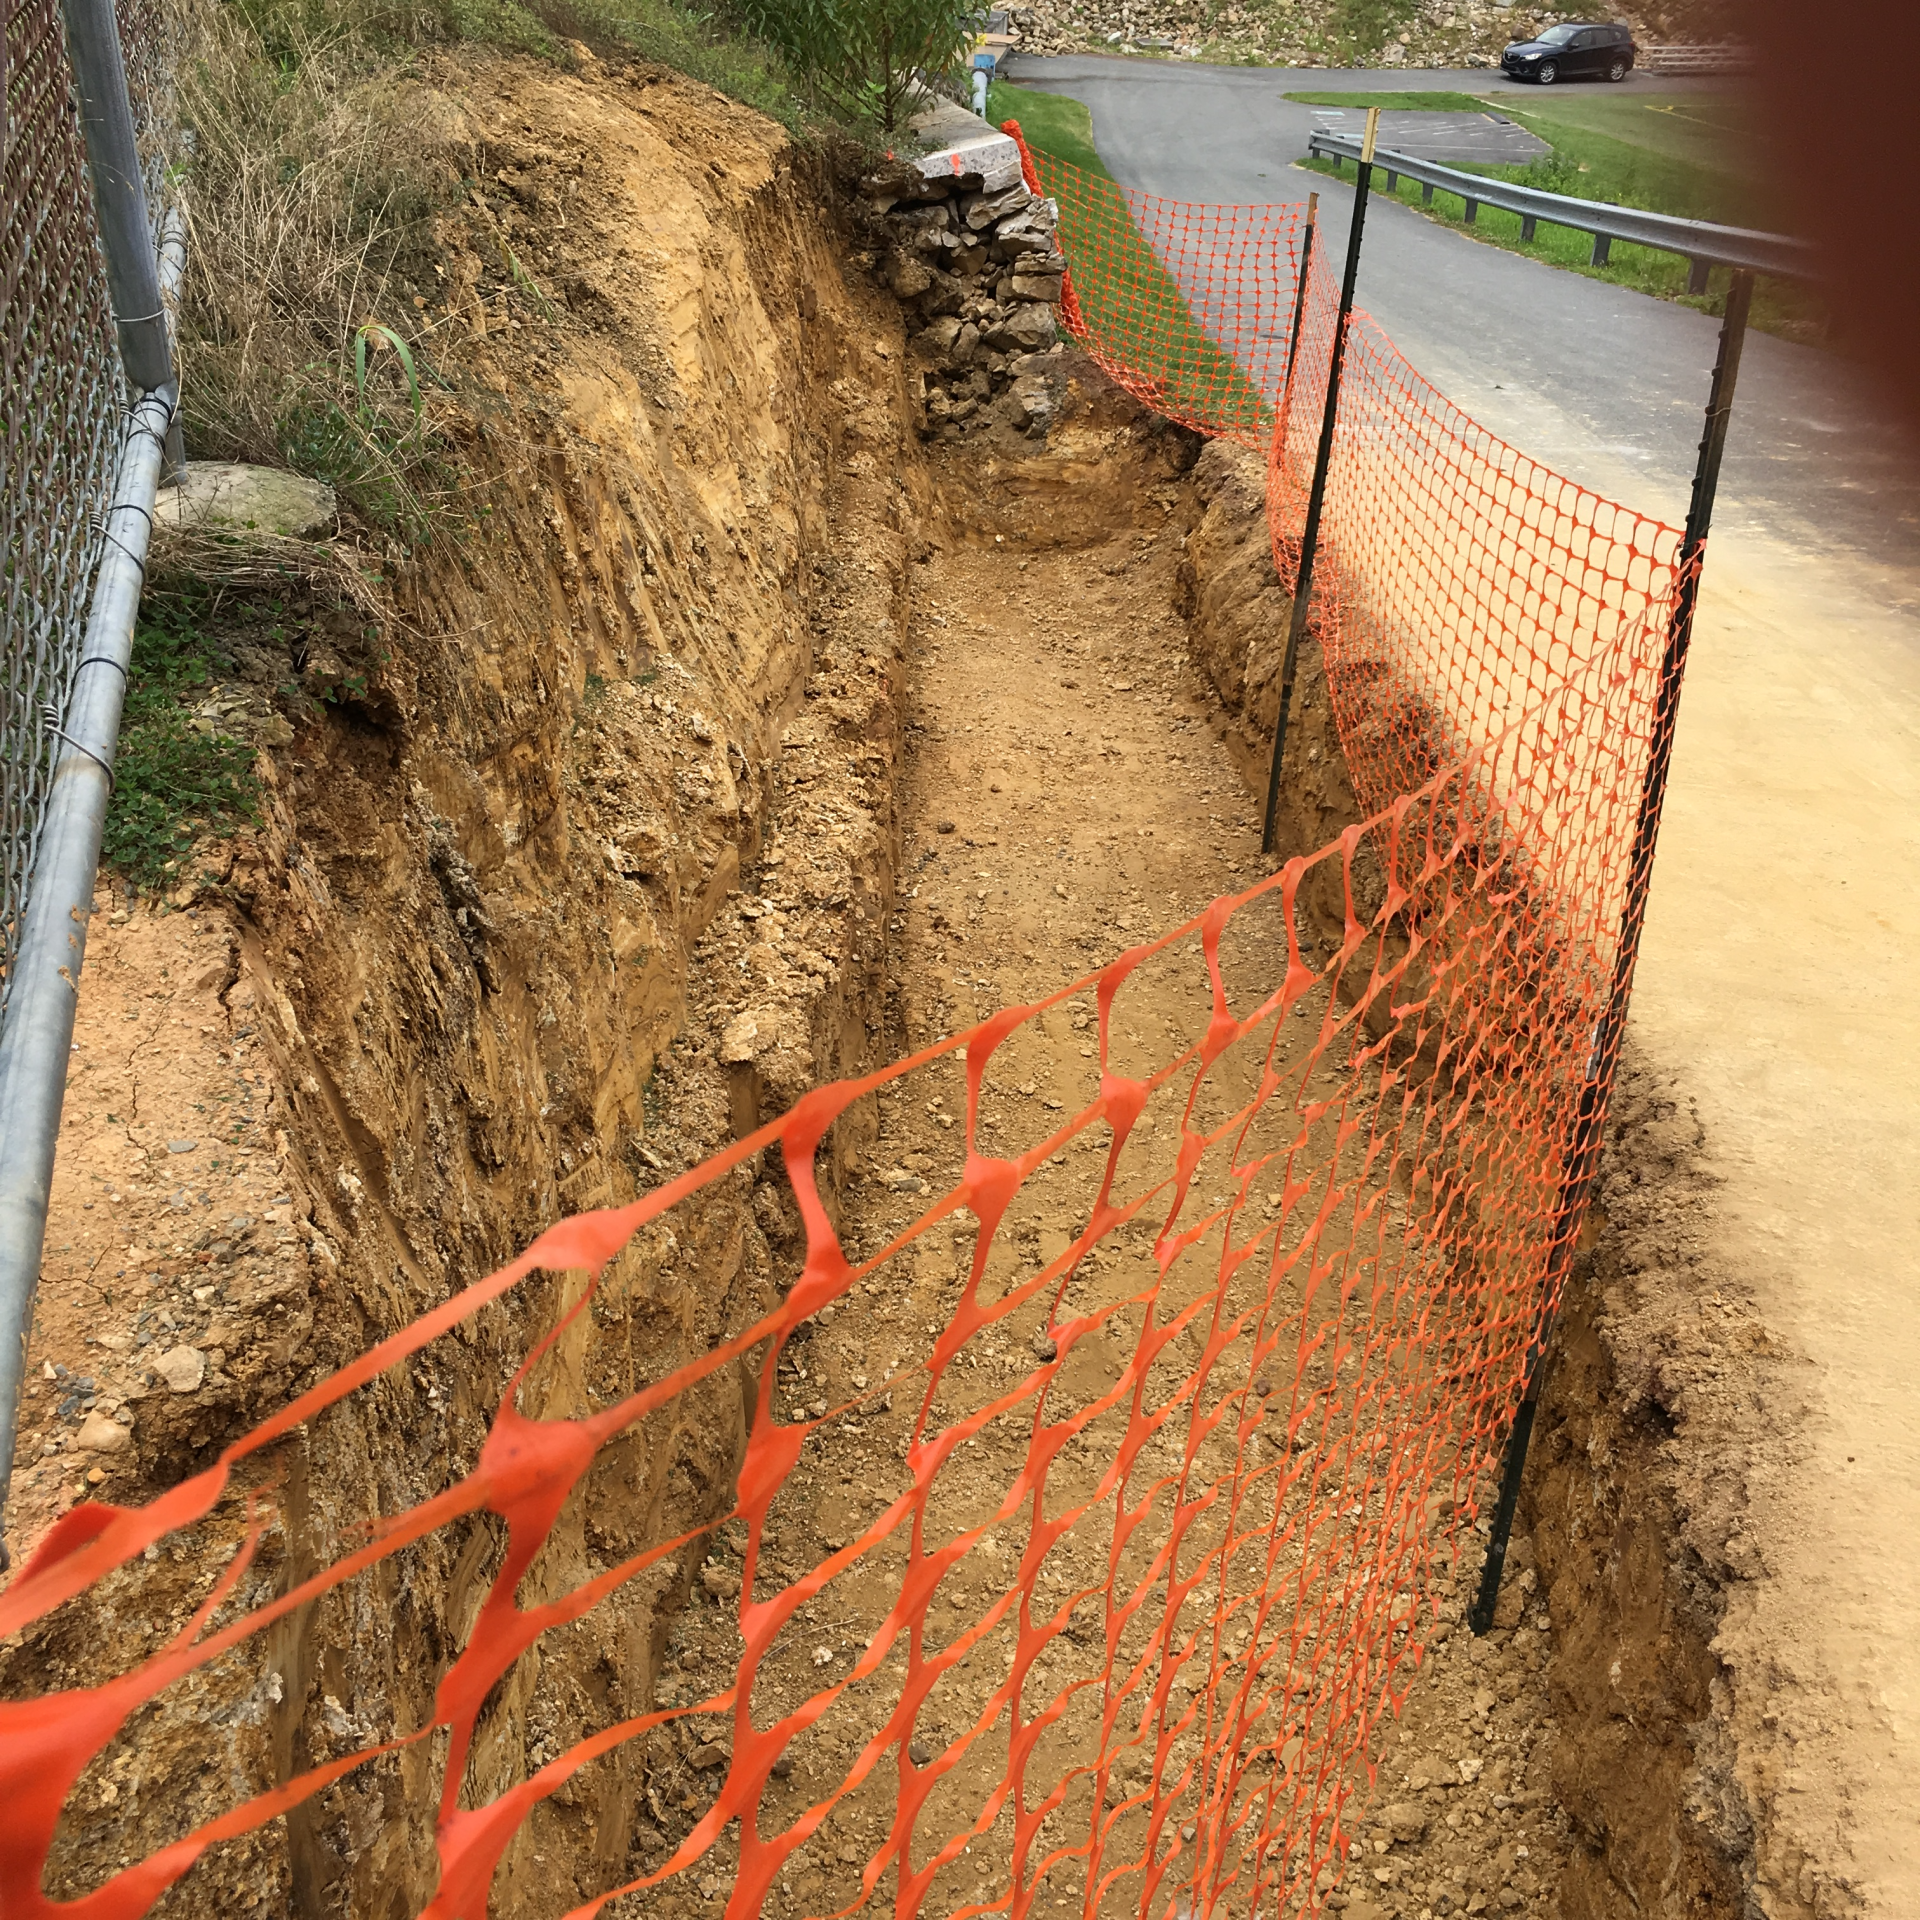 A fence surrounds a trench in the dirt next to a road